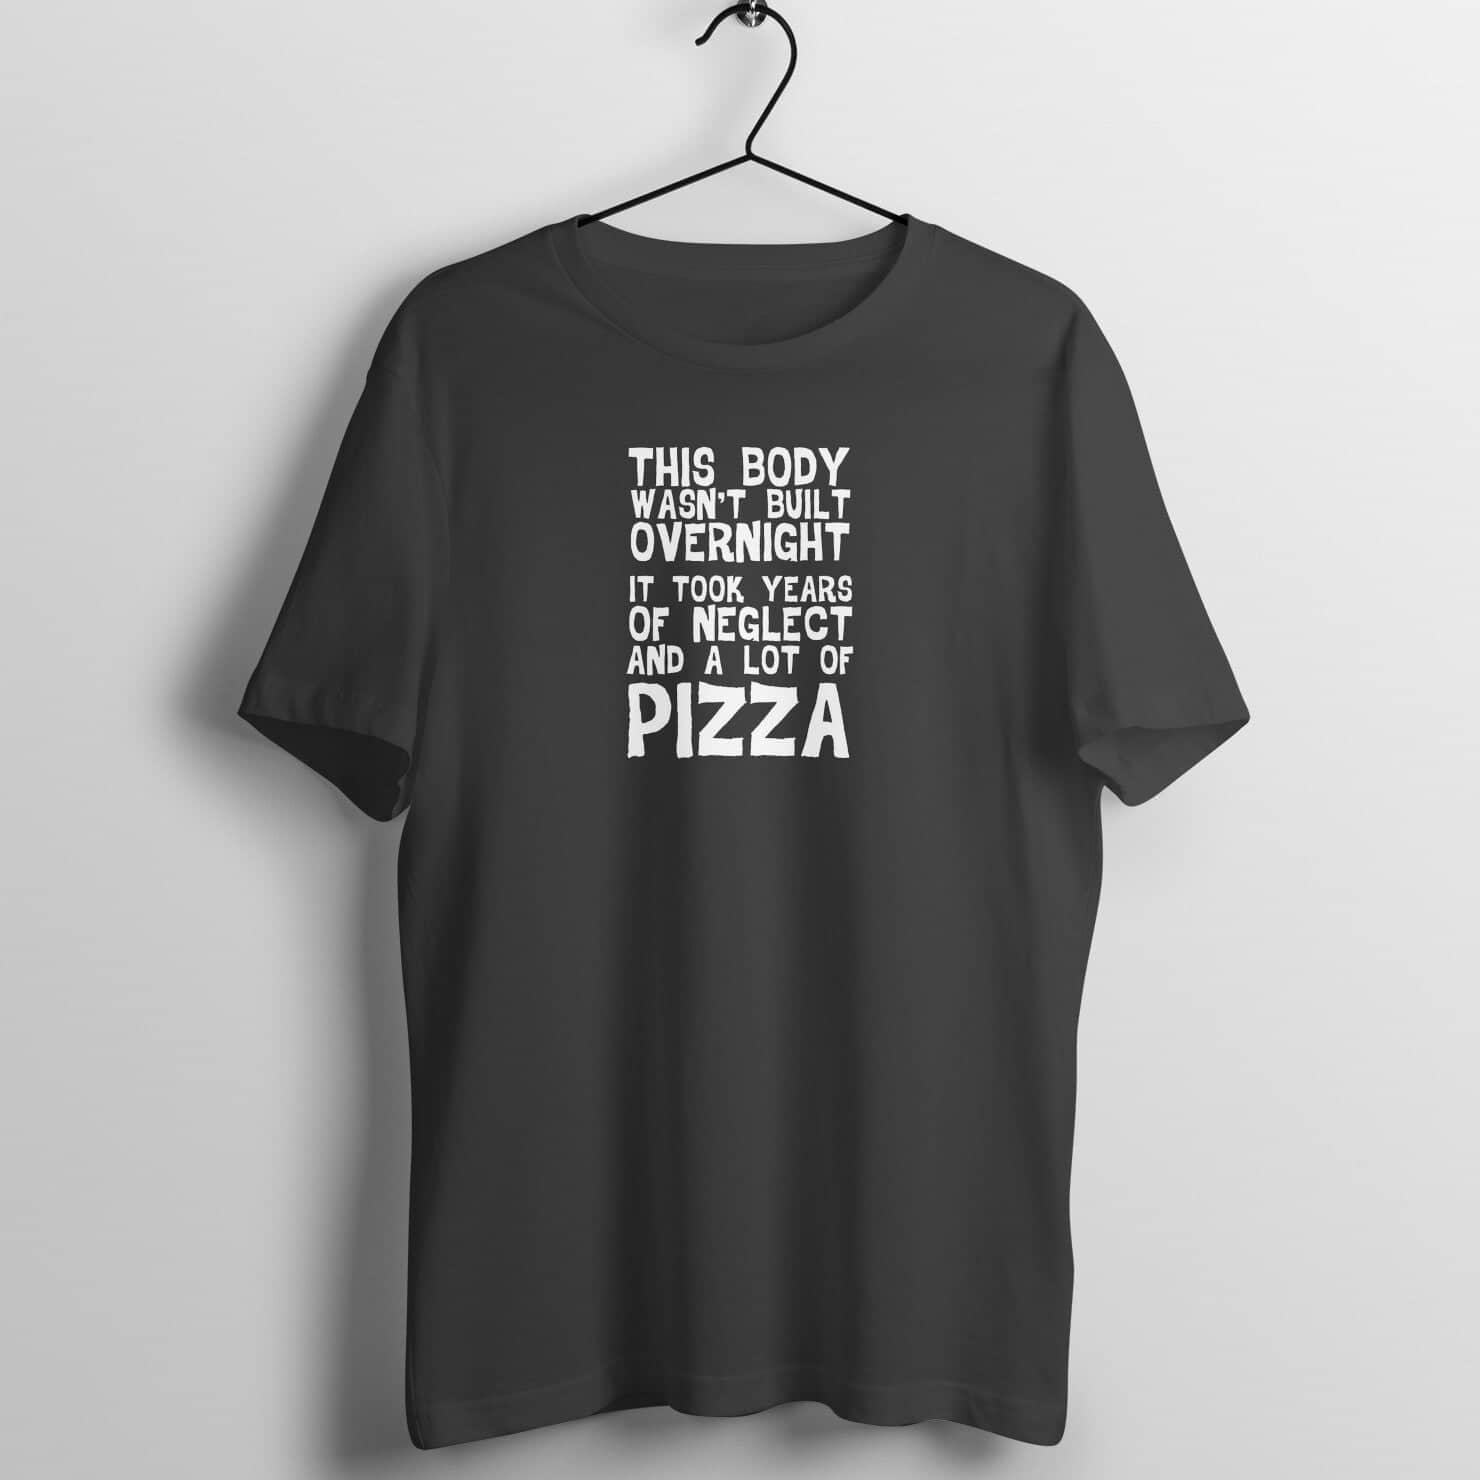 This Body Wasn't Build Overnight / Neglect and Pizza Hilarious Black T Shirt for Men and Women freeshipping - Catch My Drift India